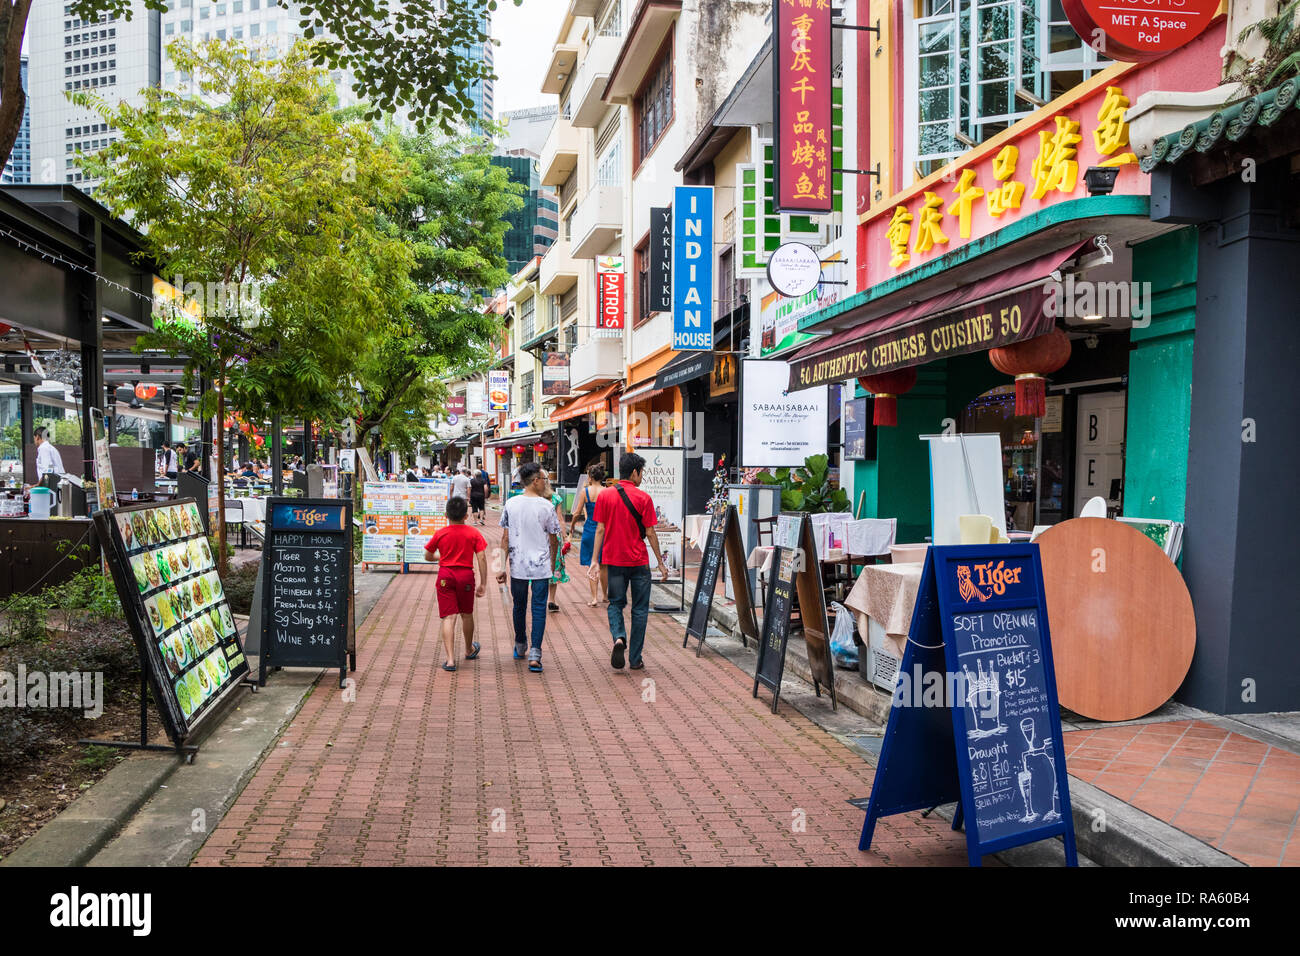 Singapore - 14th December 2018: People walking past restaurants and bars on Boat Quay. The street is popular with both tourists and expats. Stock Photo